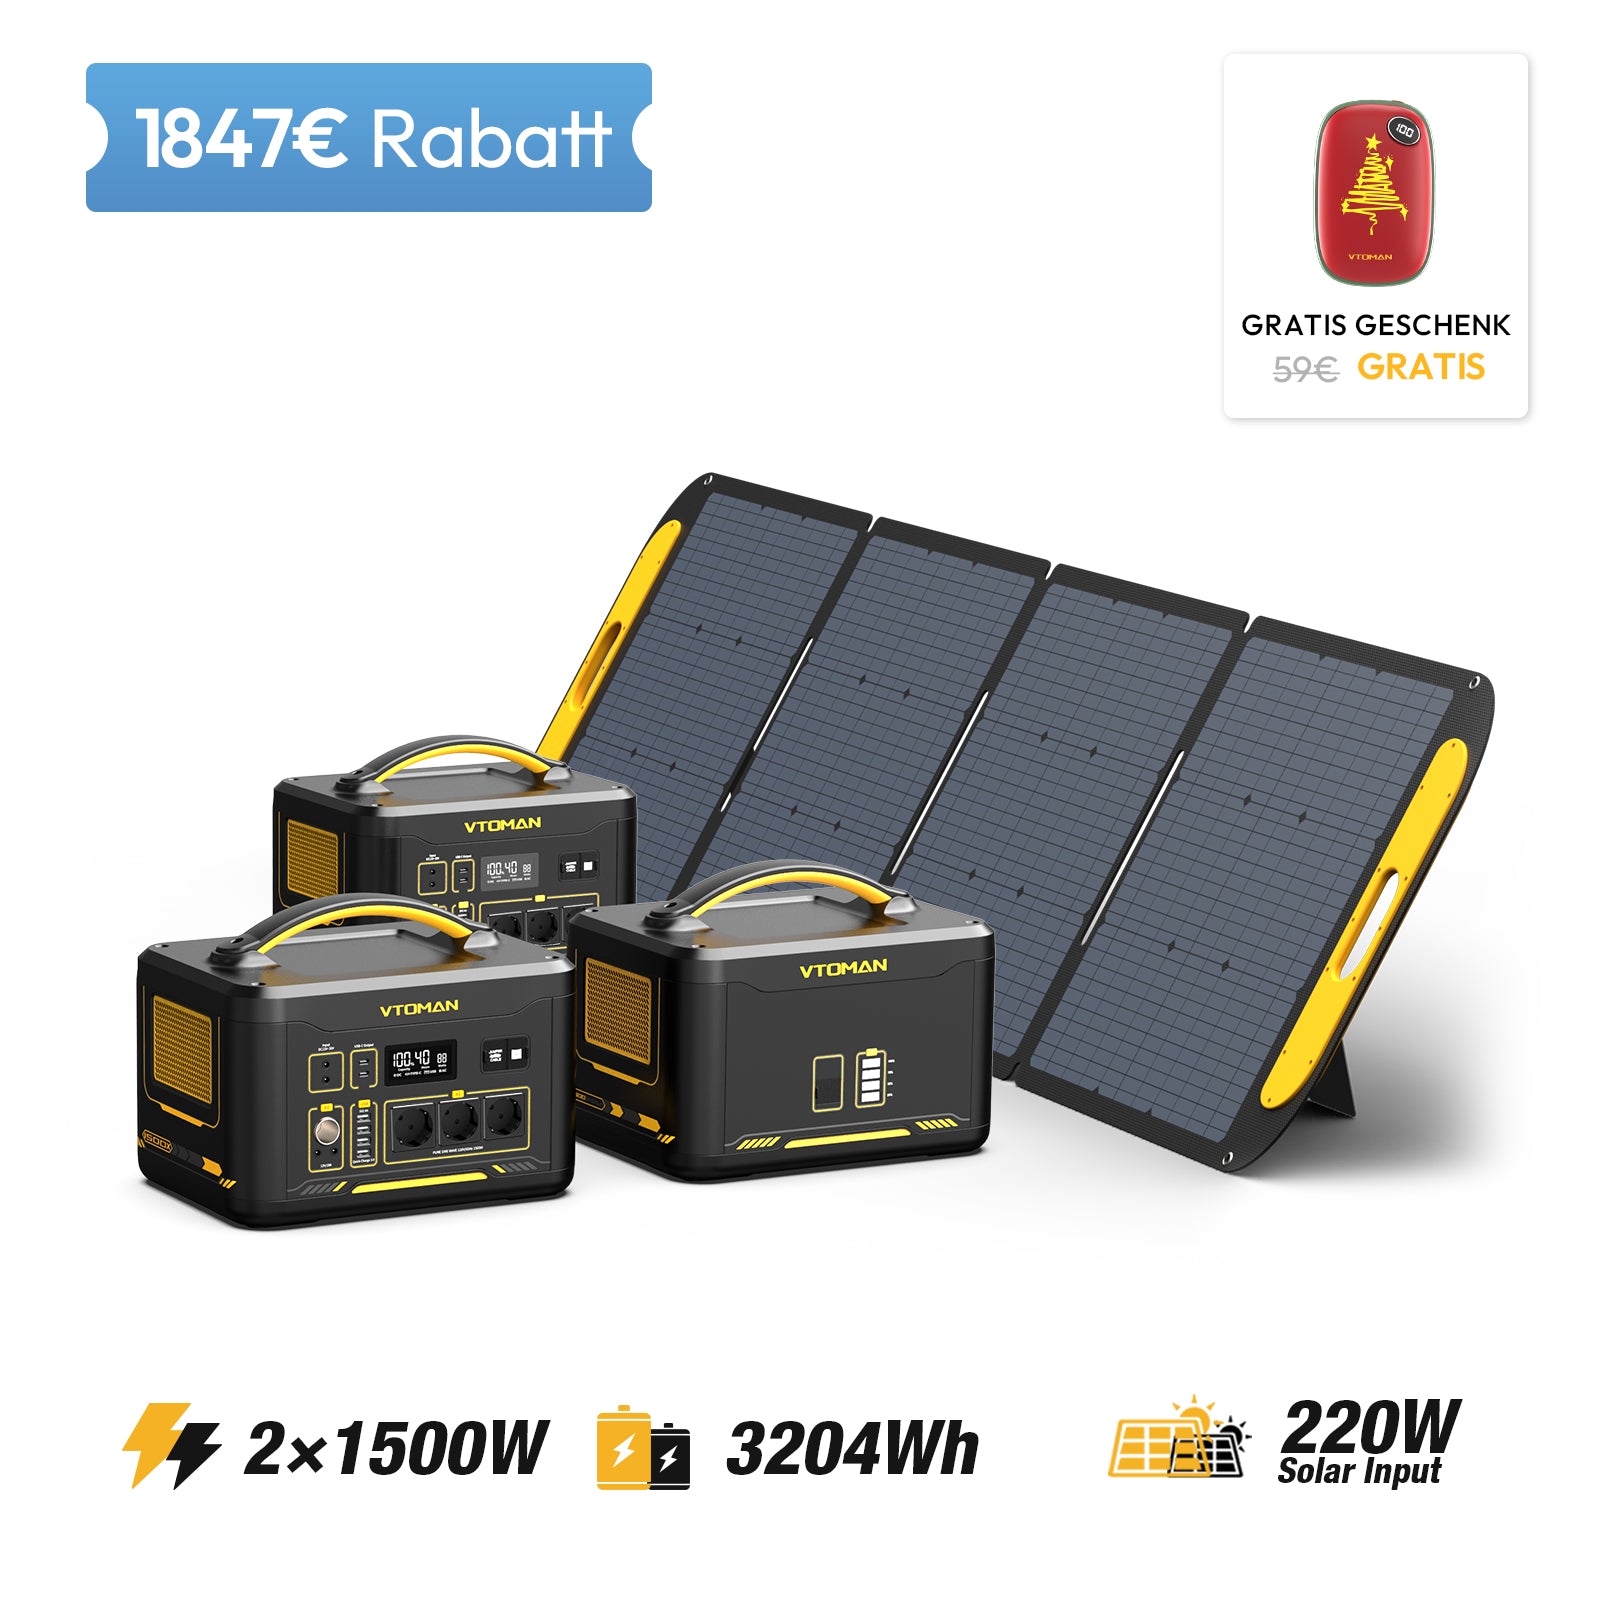 Jump 1500W/3204Wh 220W Solargenerator